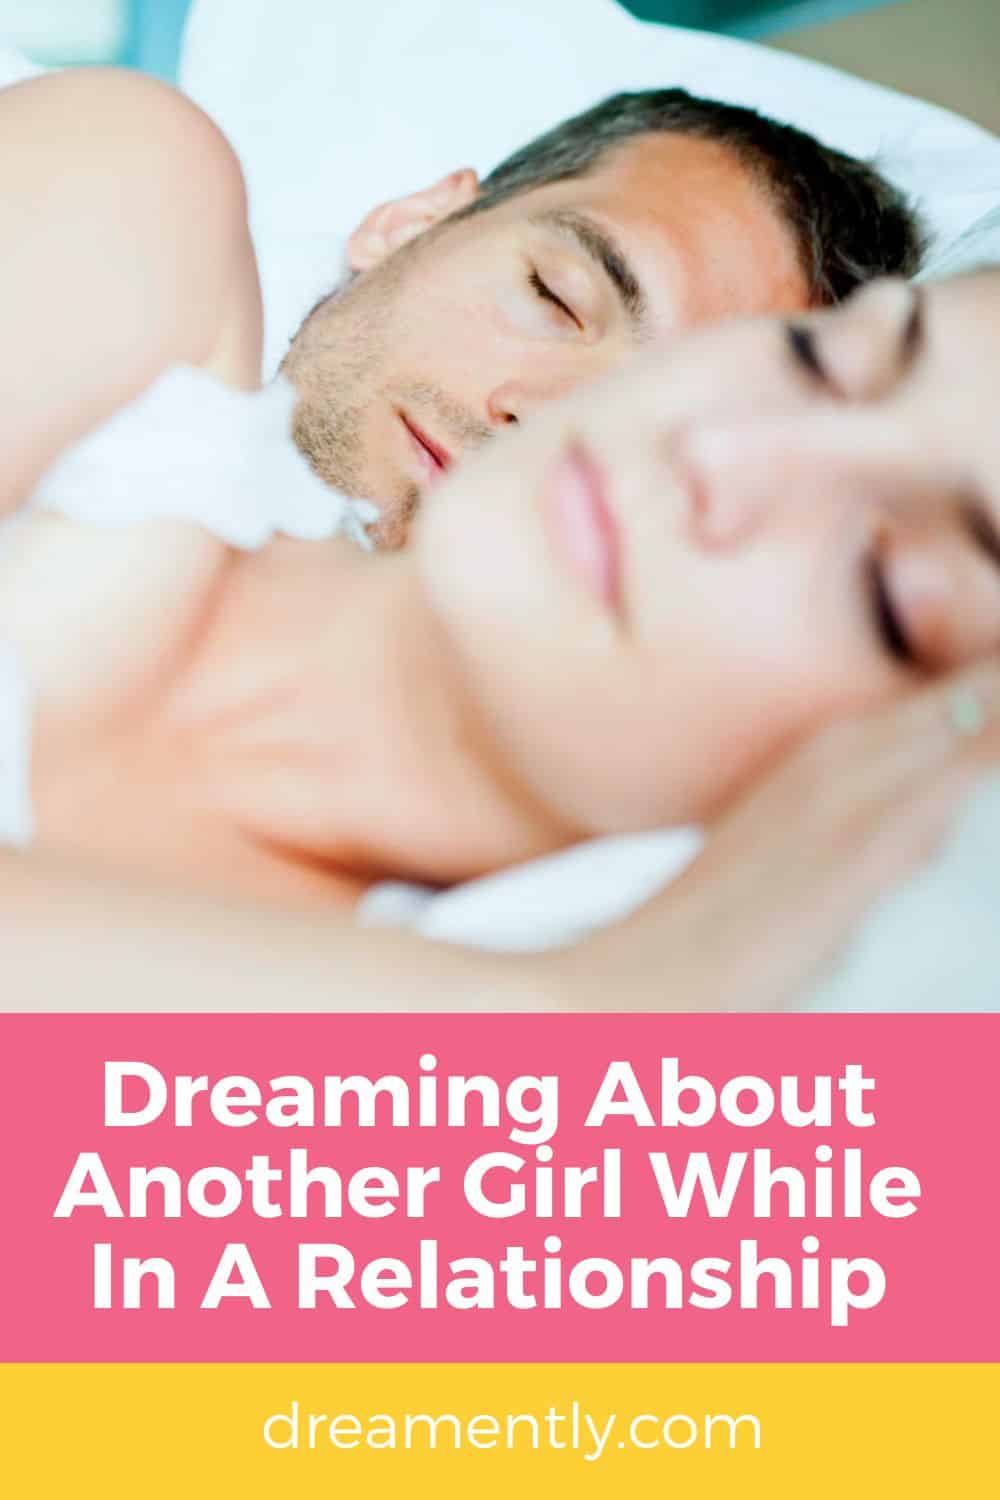 Dreaming About Another Girl While In A Relationship